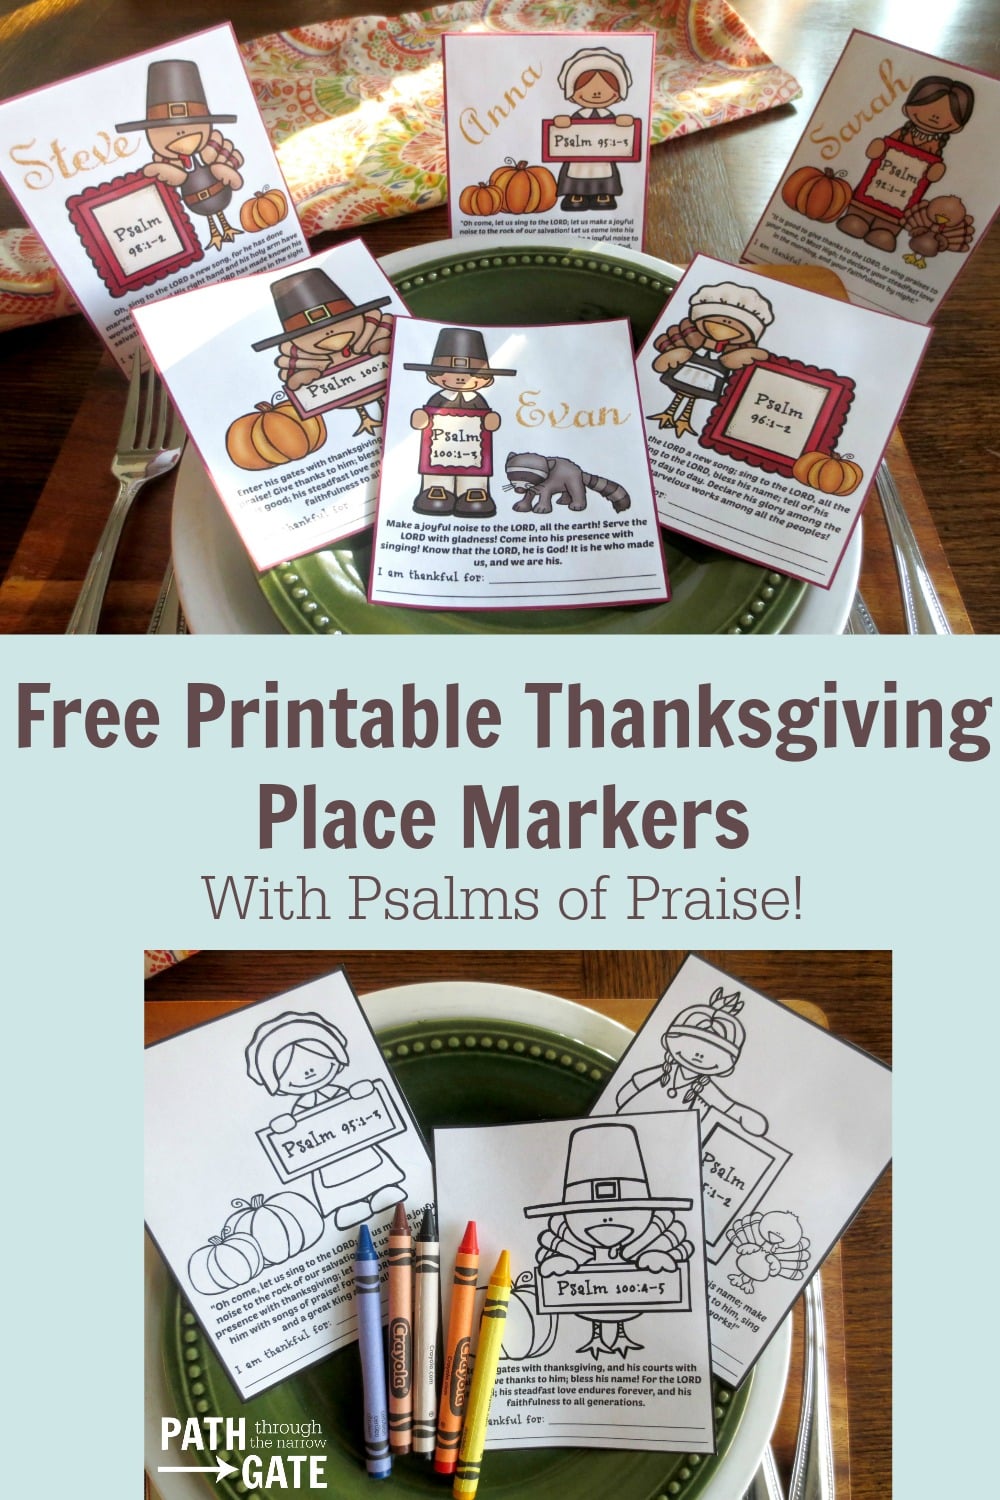 Are you looking for a way to add some verses of Thanksgiving to your holiday table? These adorable Printable Thanksgiving Place Holders are just the ticket! They come in three different Bible versions. My kids would love coloring these on Thanksgiving!